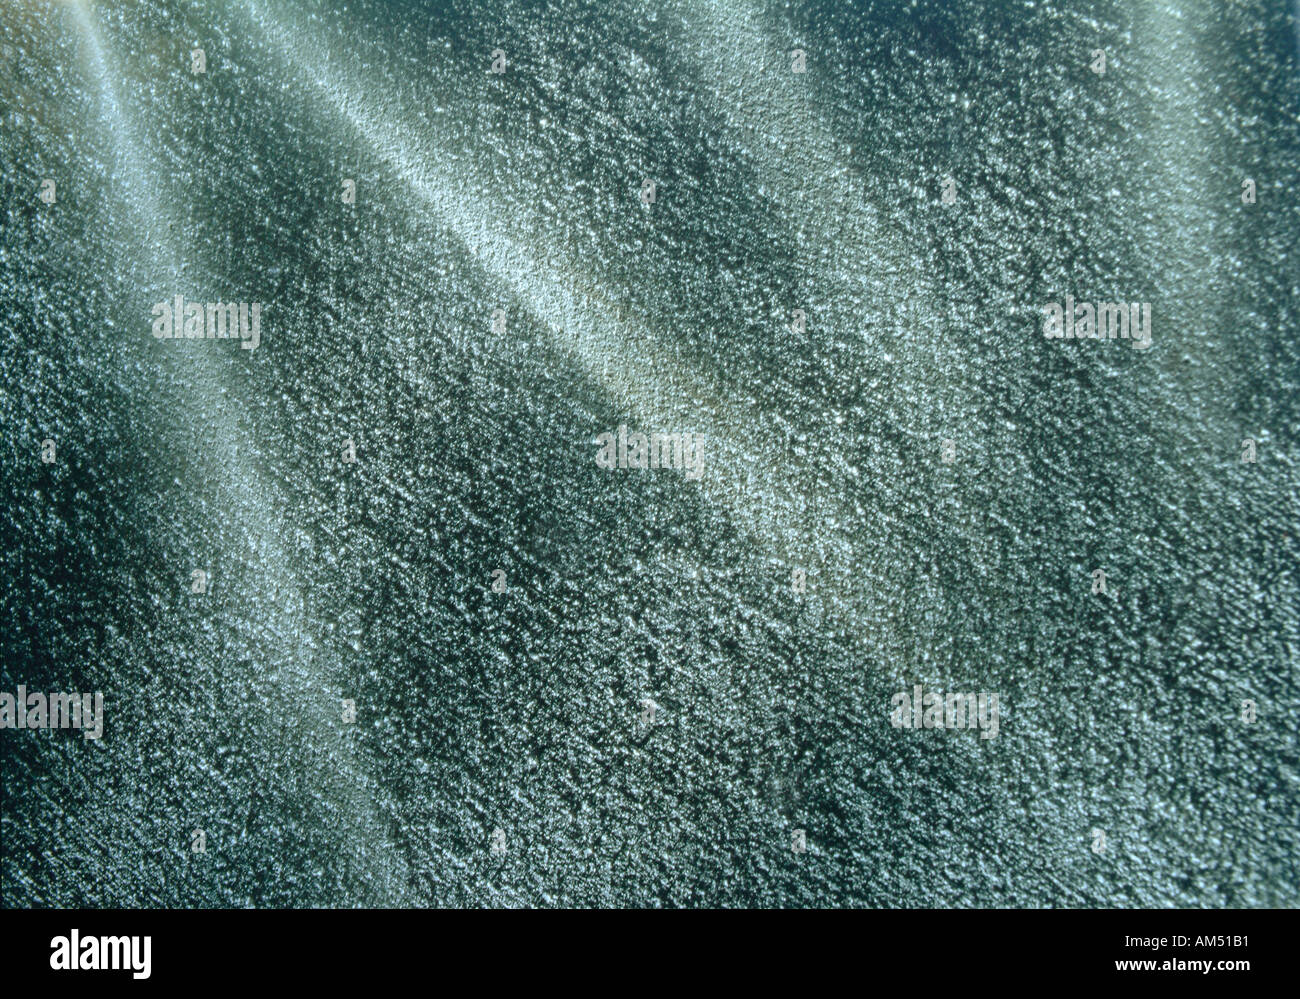 a paper background with streaks of light Stock Photo